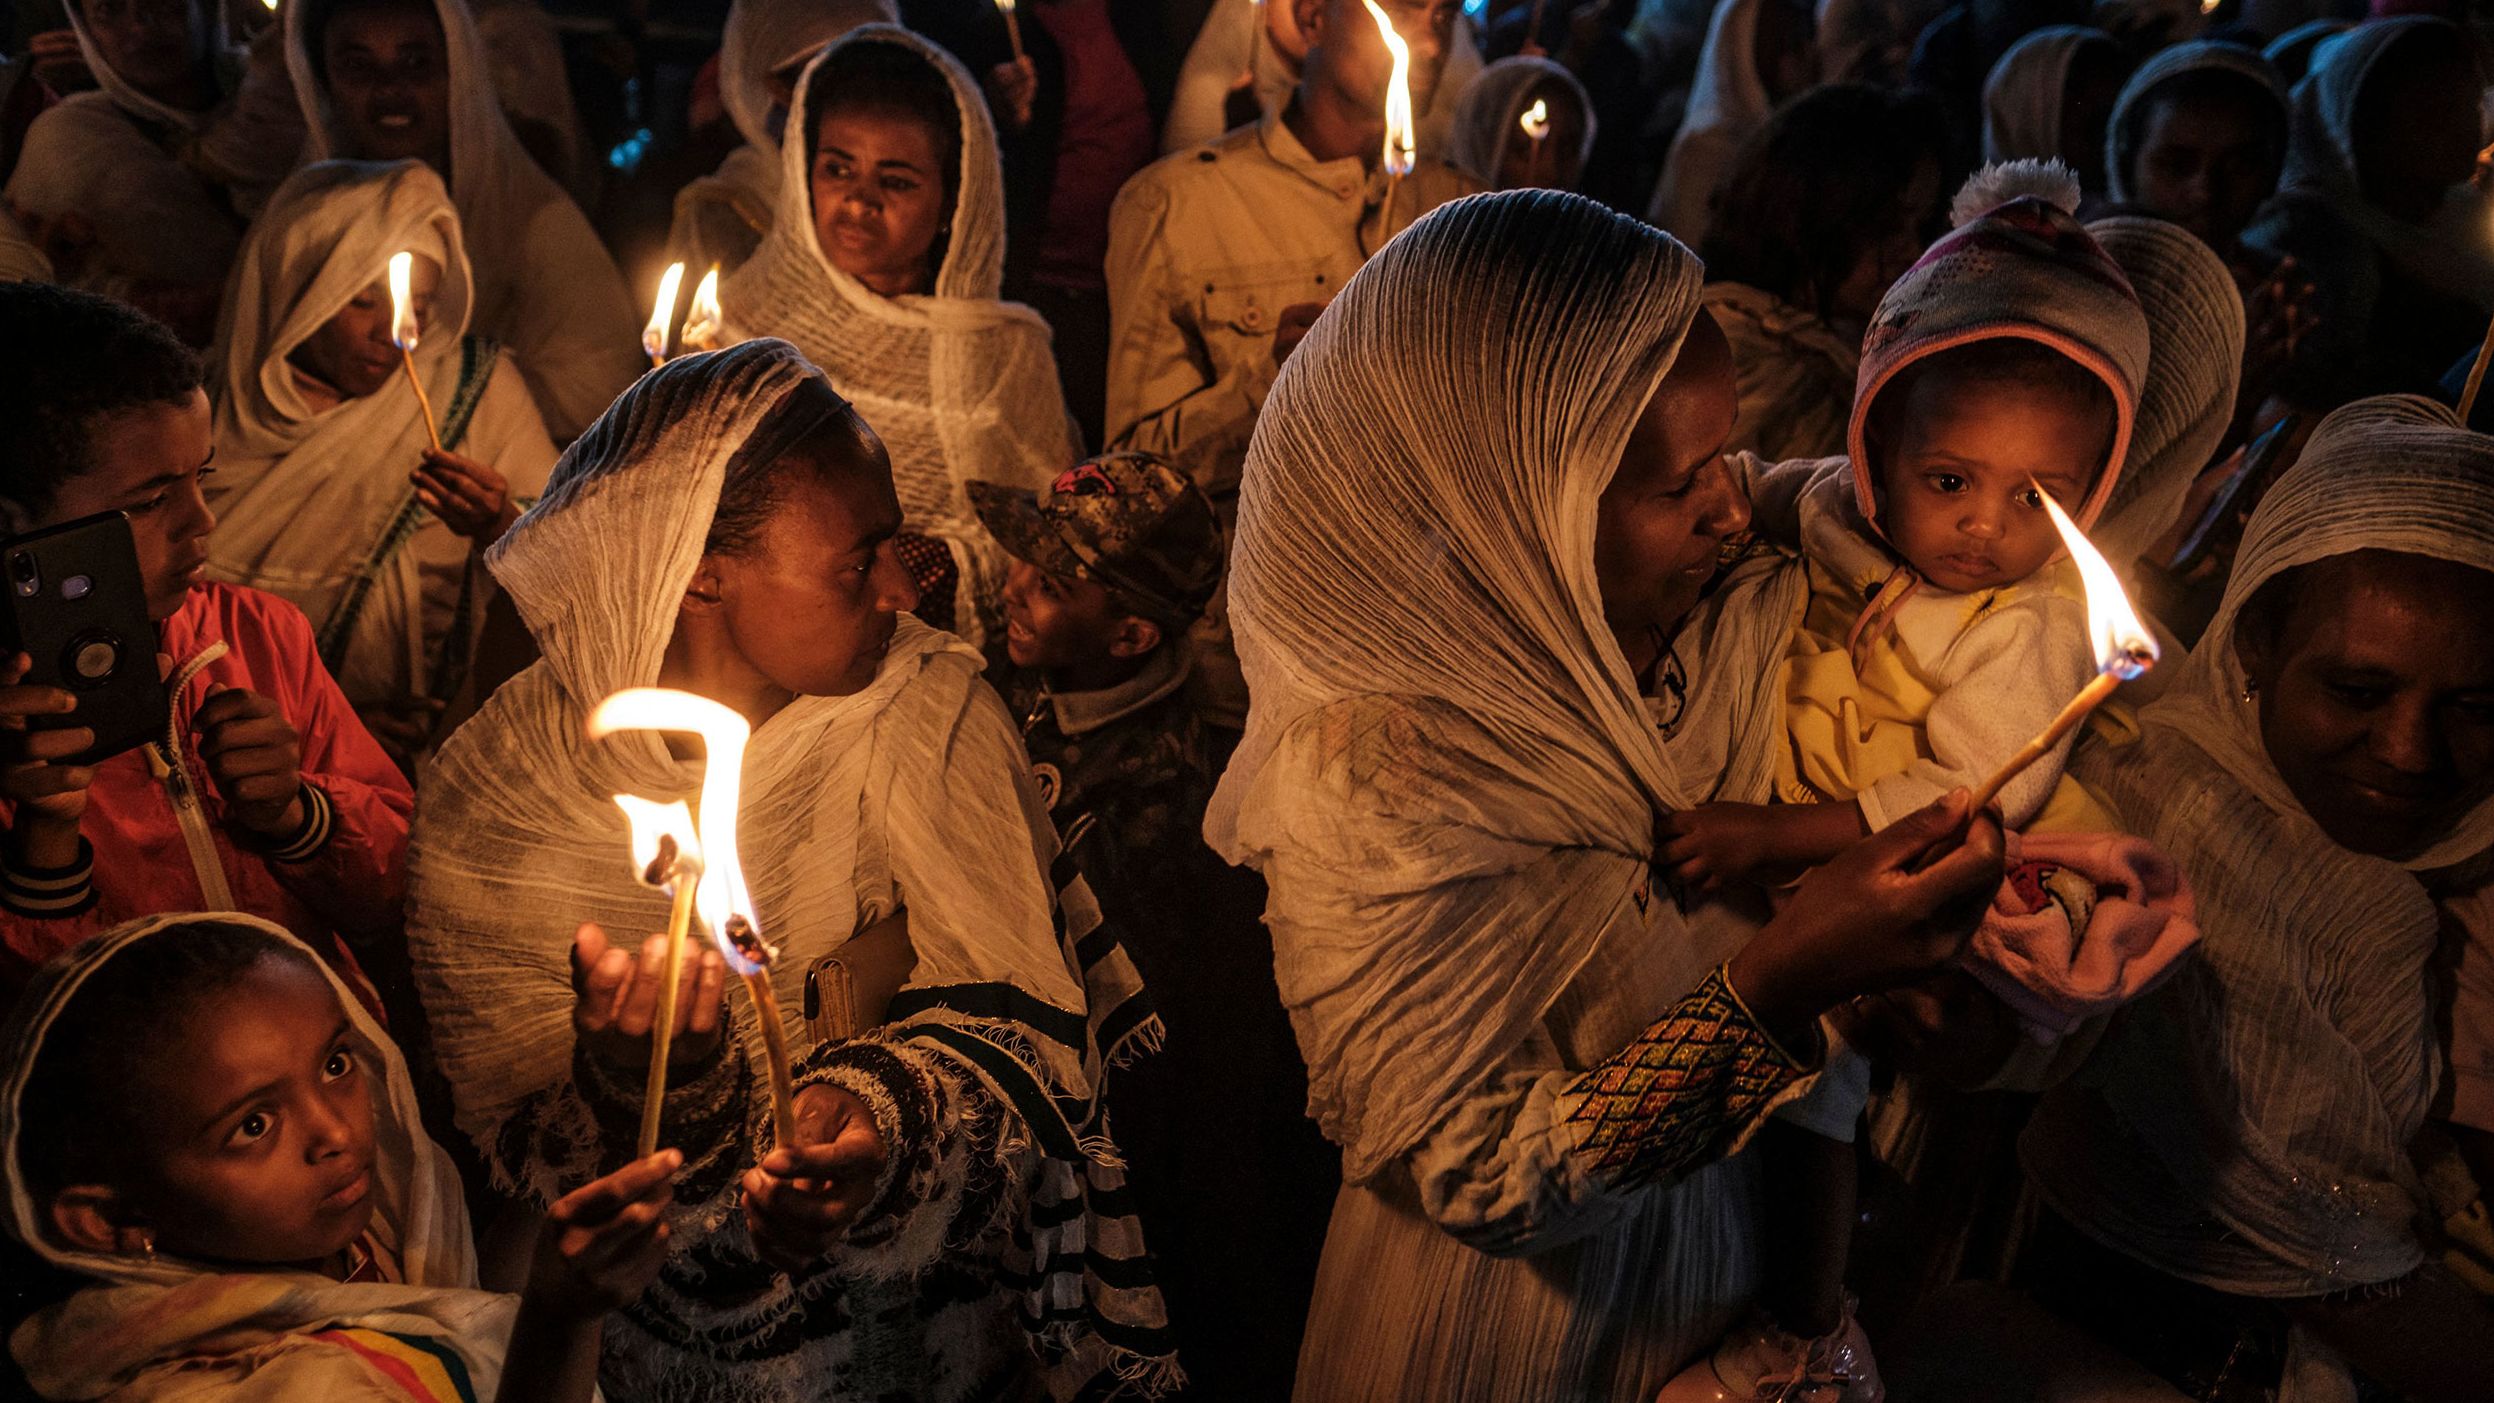 People in Addis Ababa, Ethiopia, hold candles Monday, September 26, during celebrations that were held on the eve of the Ethiopian Orthodox holiday of Meskel.